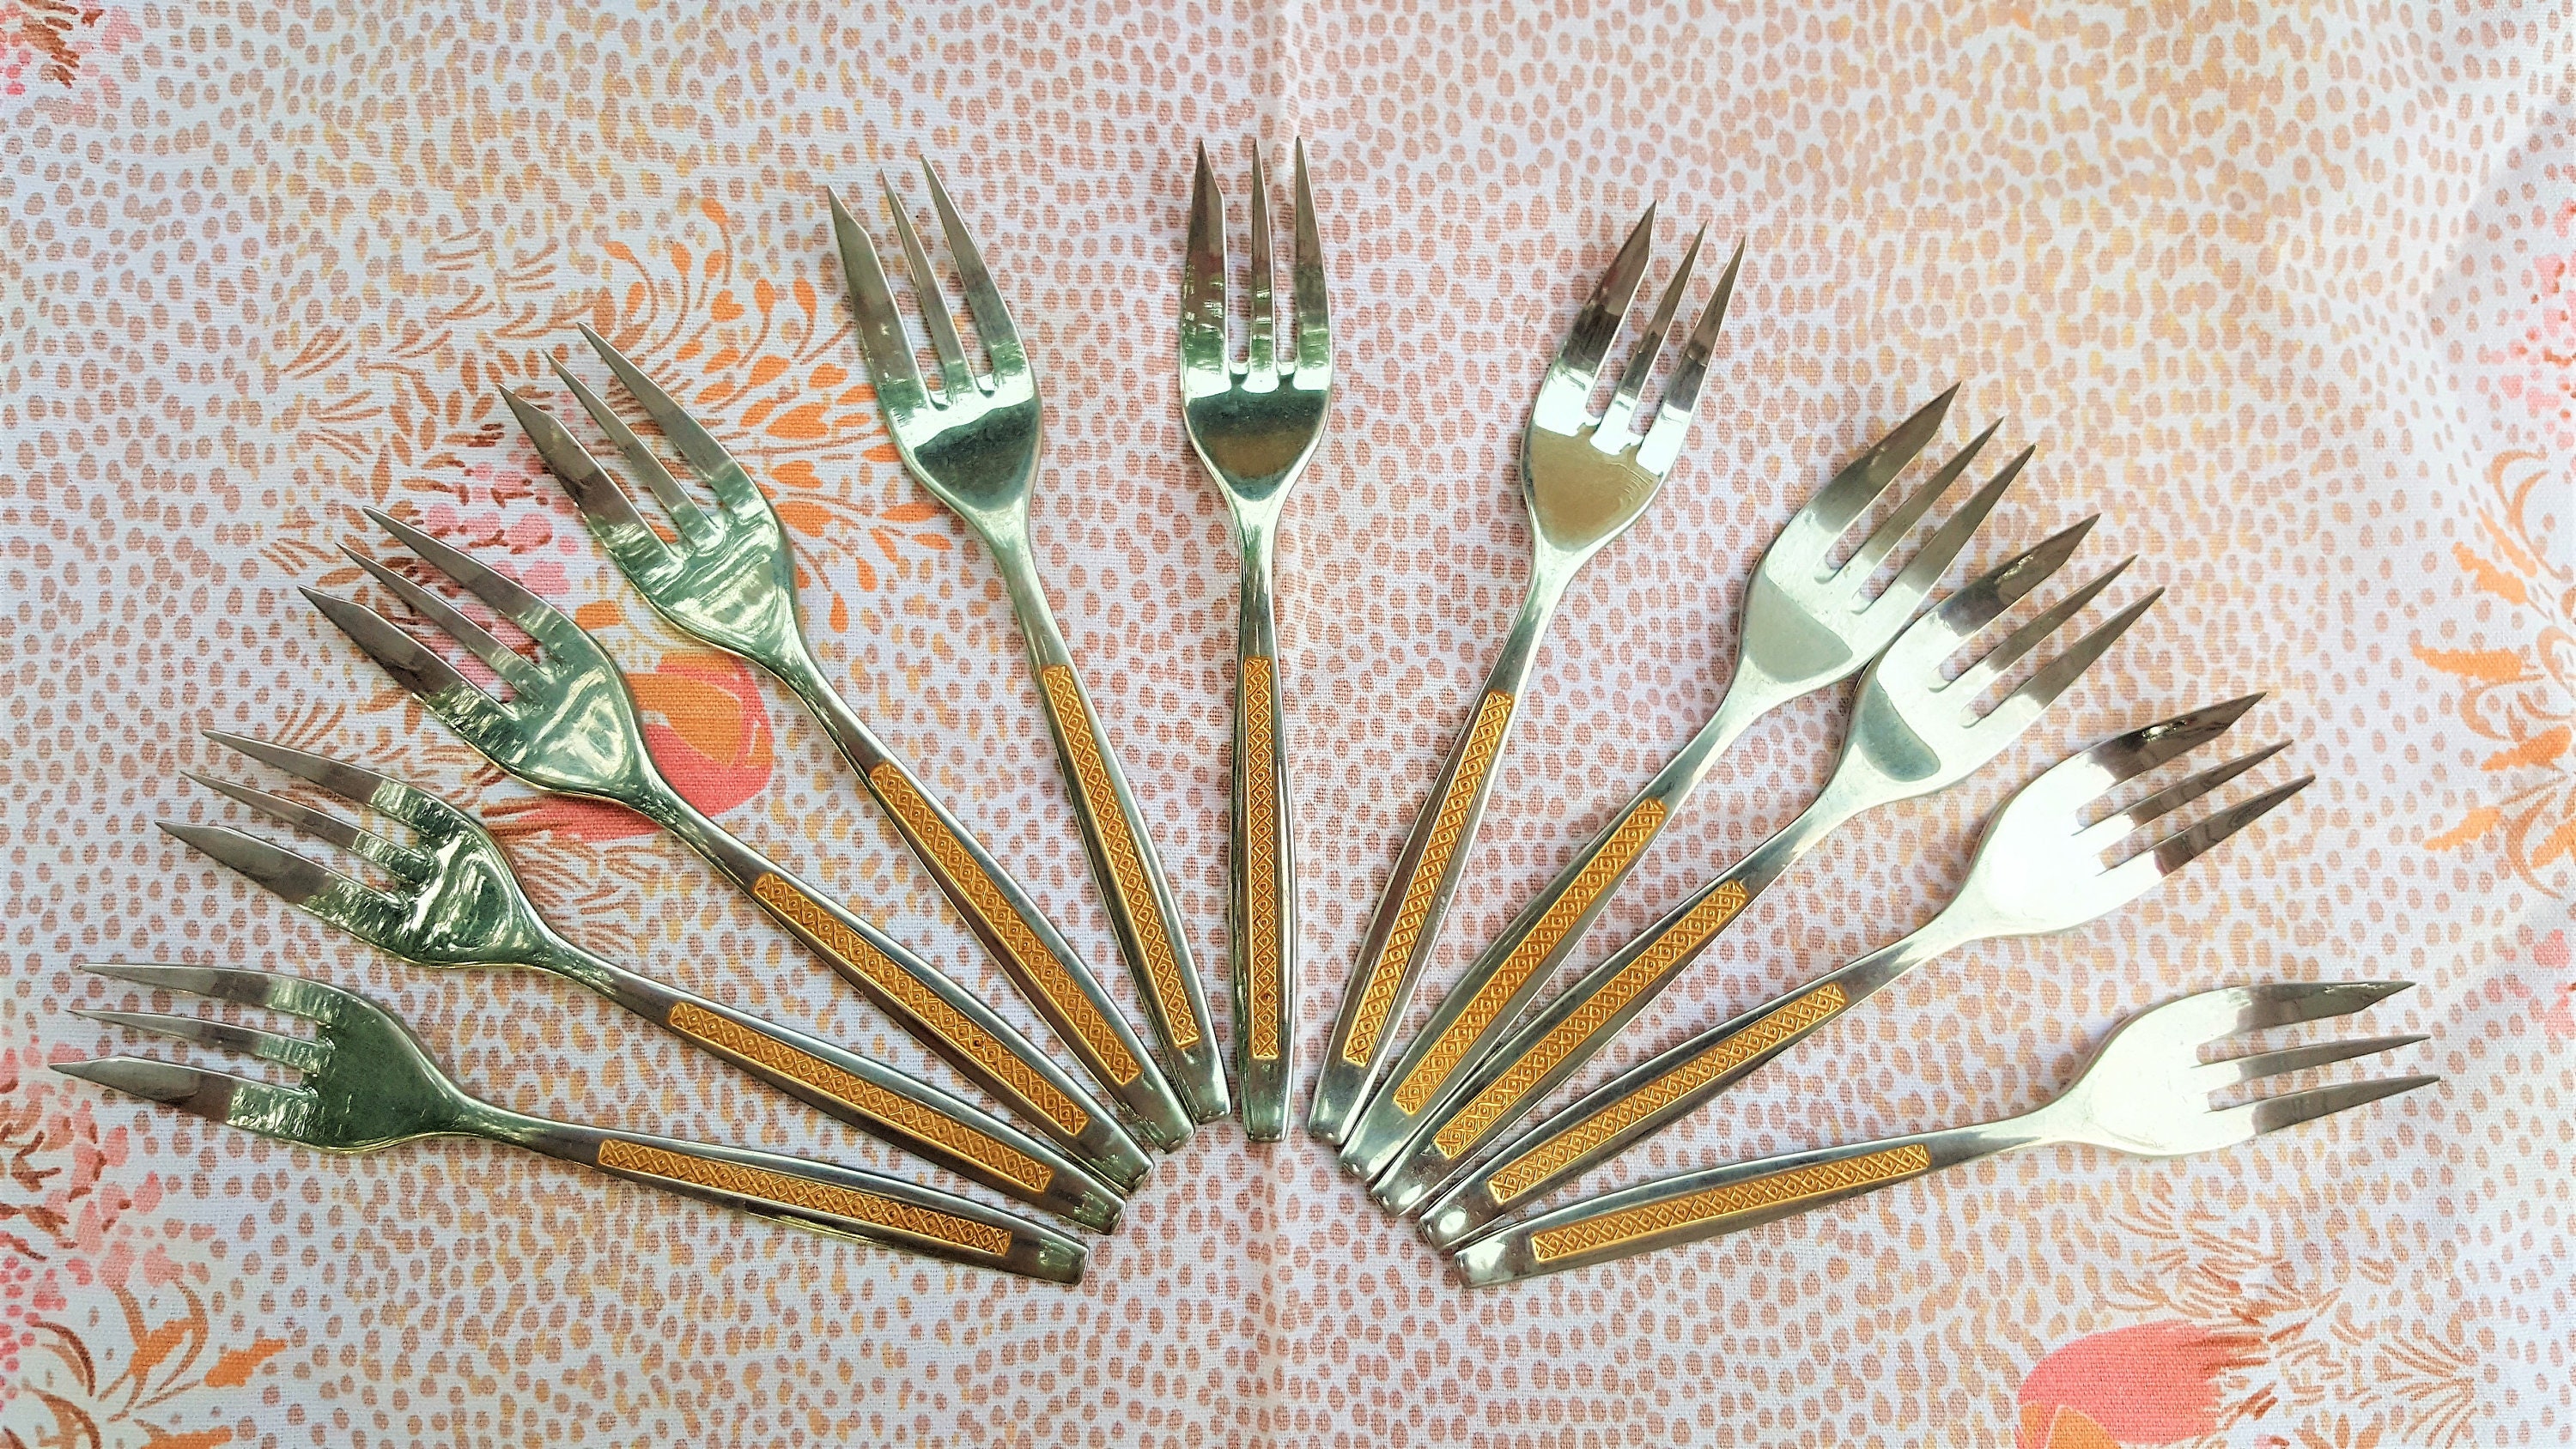 Vintage 18-8 Sms Stainless Steel Pastry Forks Of Sarosil From Germany